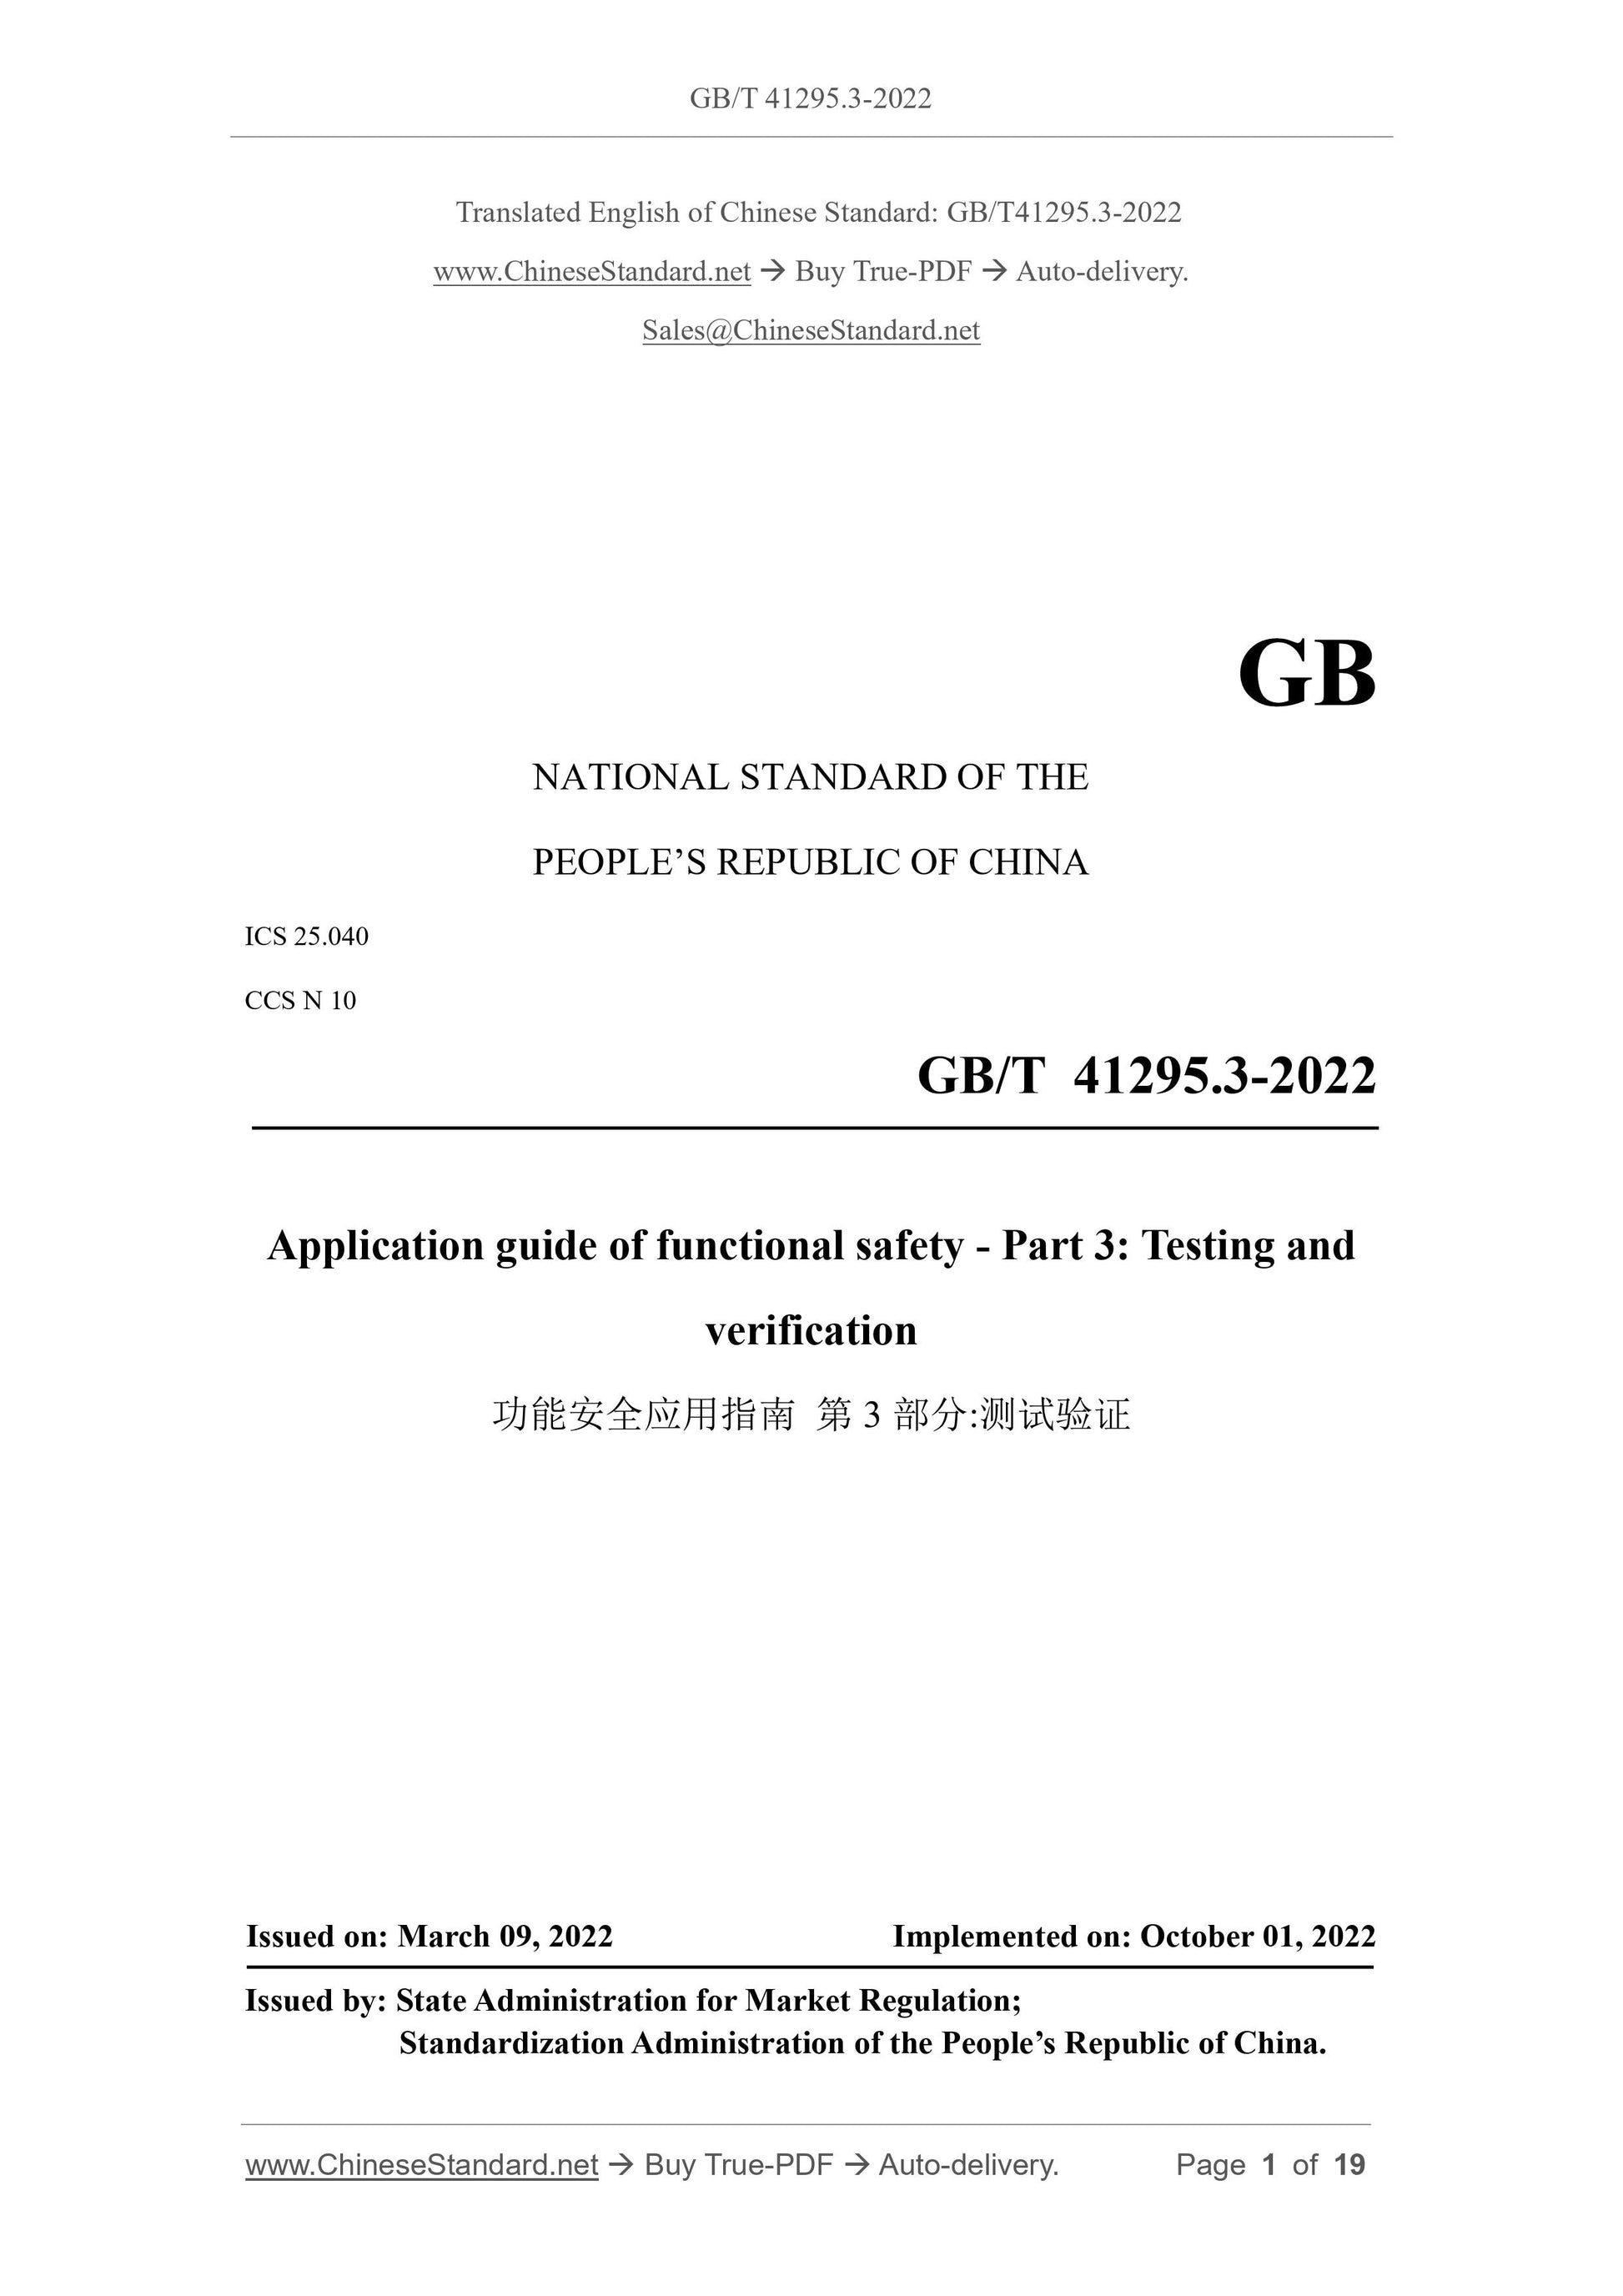 GB/T 41295.3-2022 Page 1